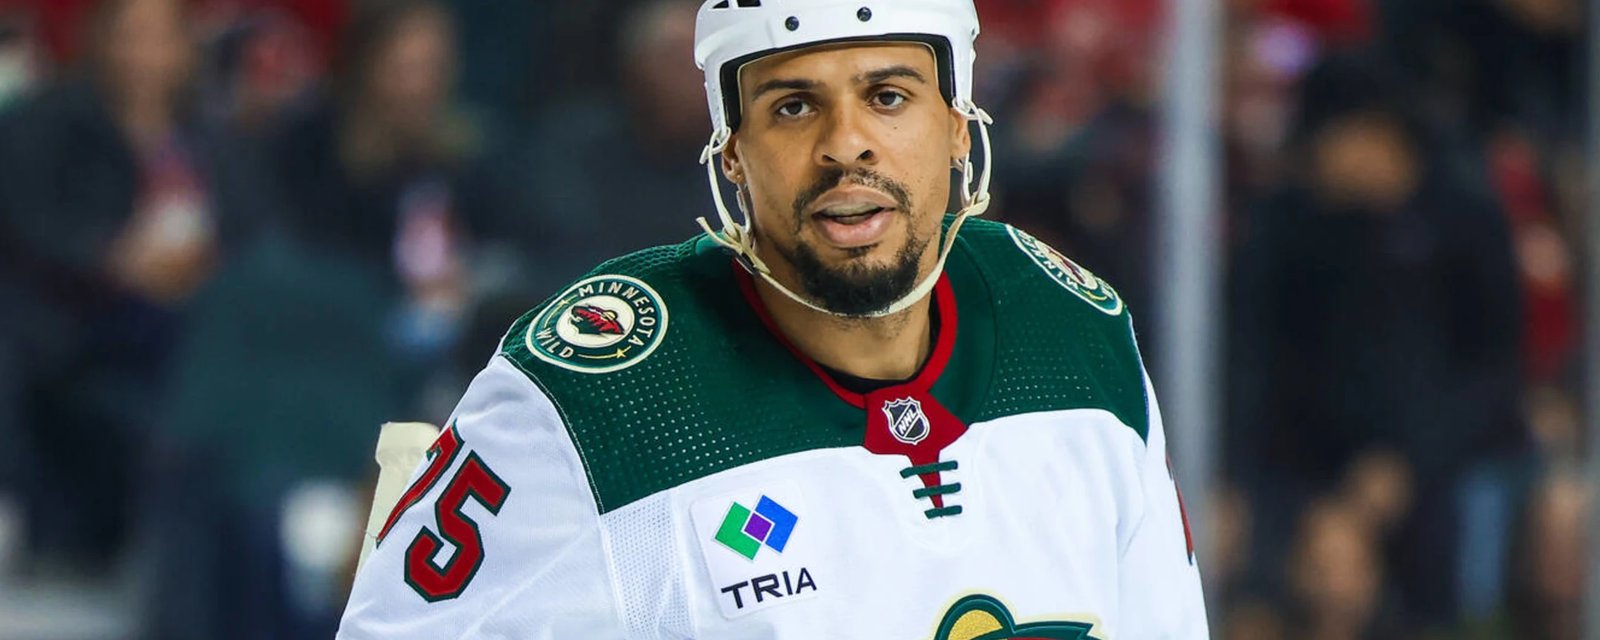 Just In: Maple Leafs to sign Ryan Reaves 